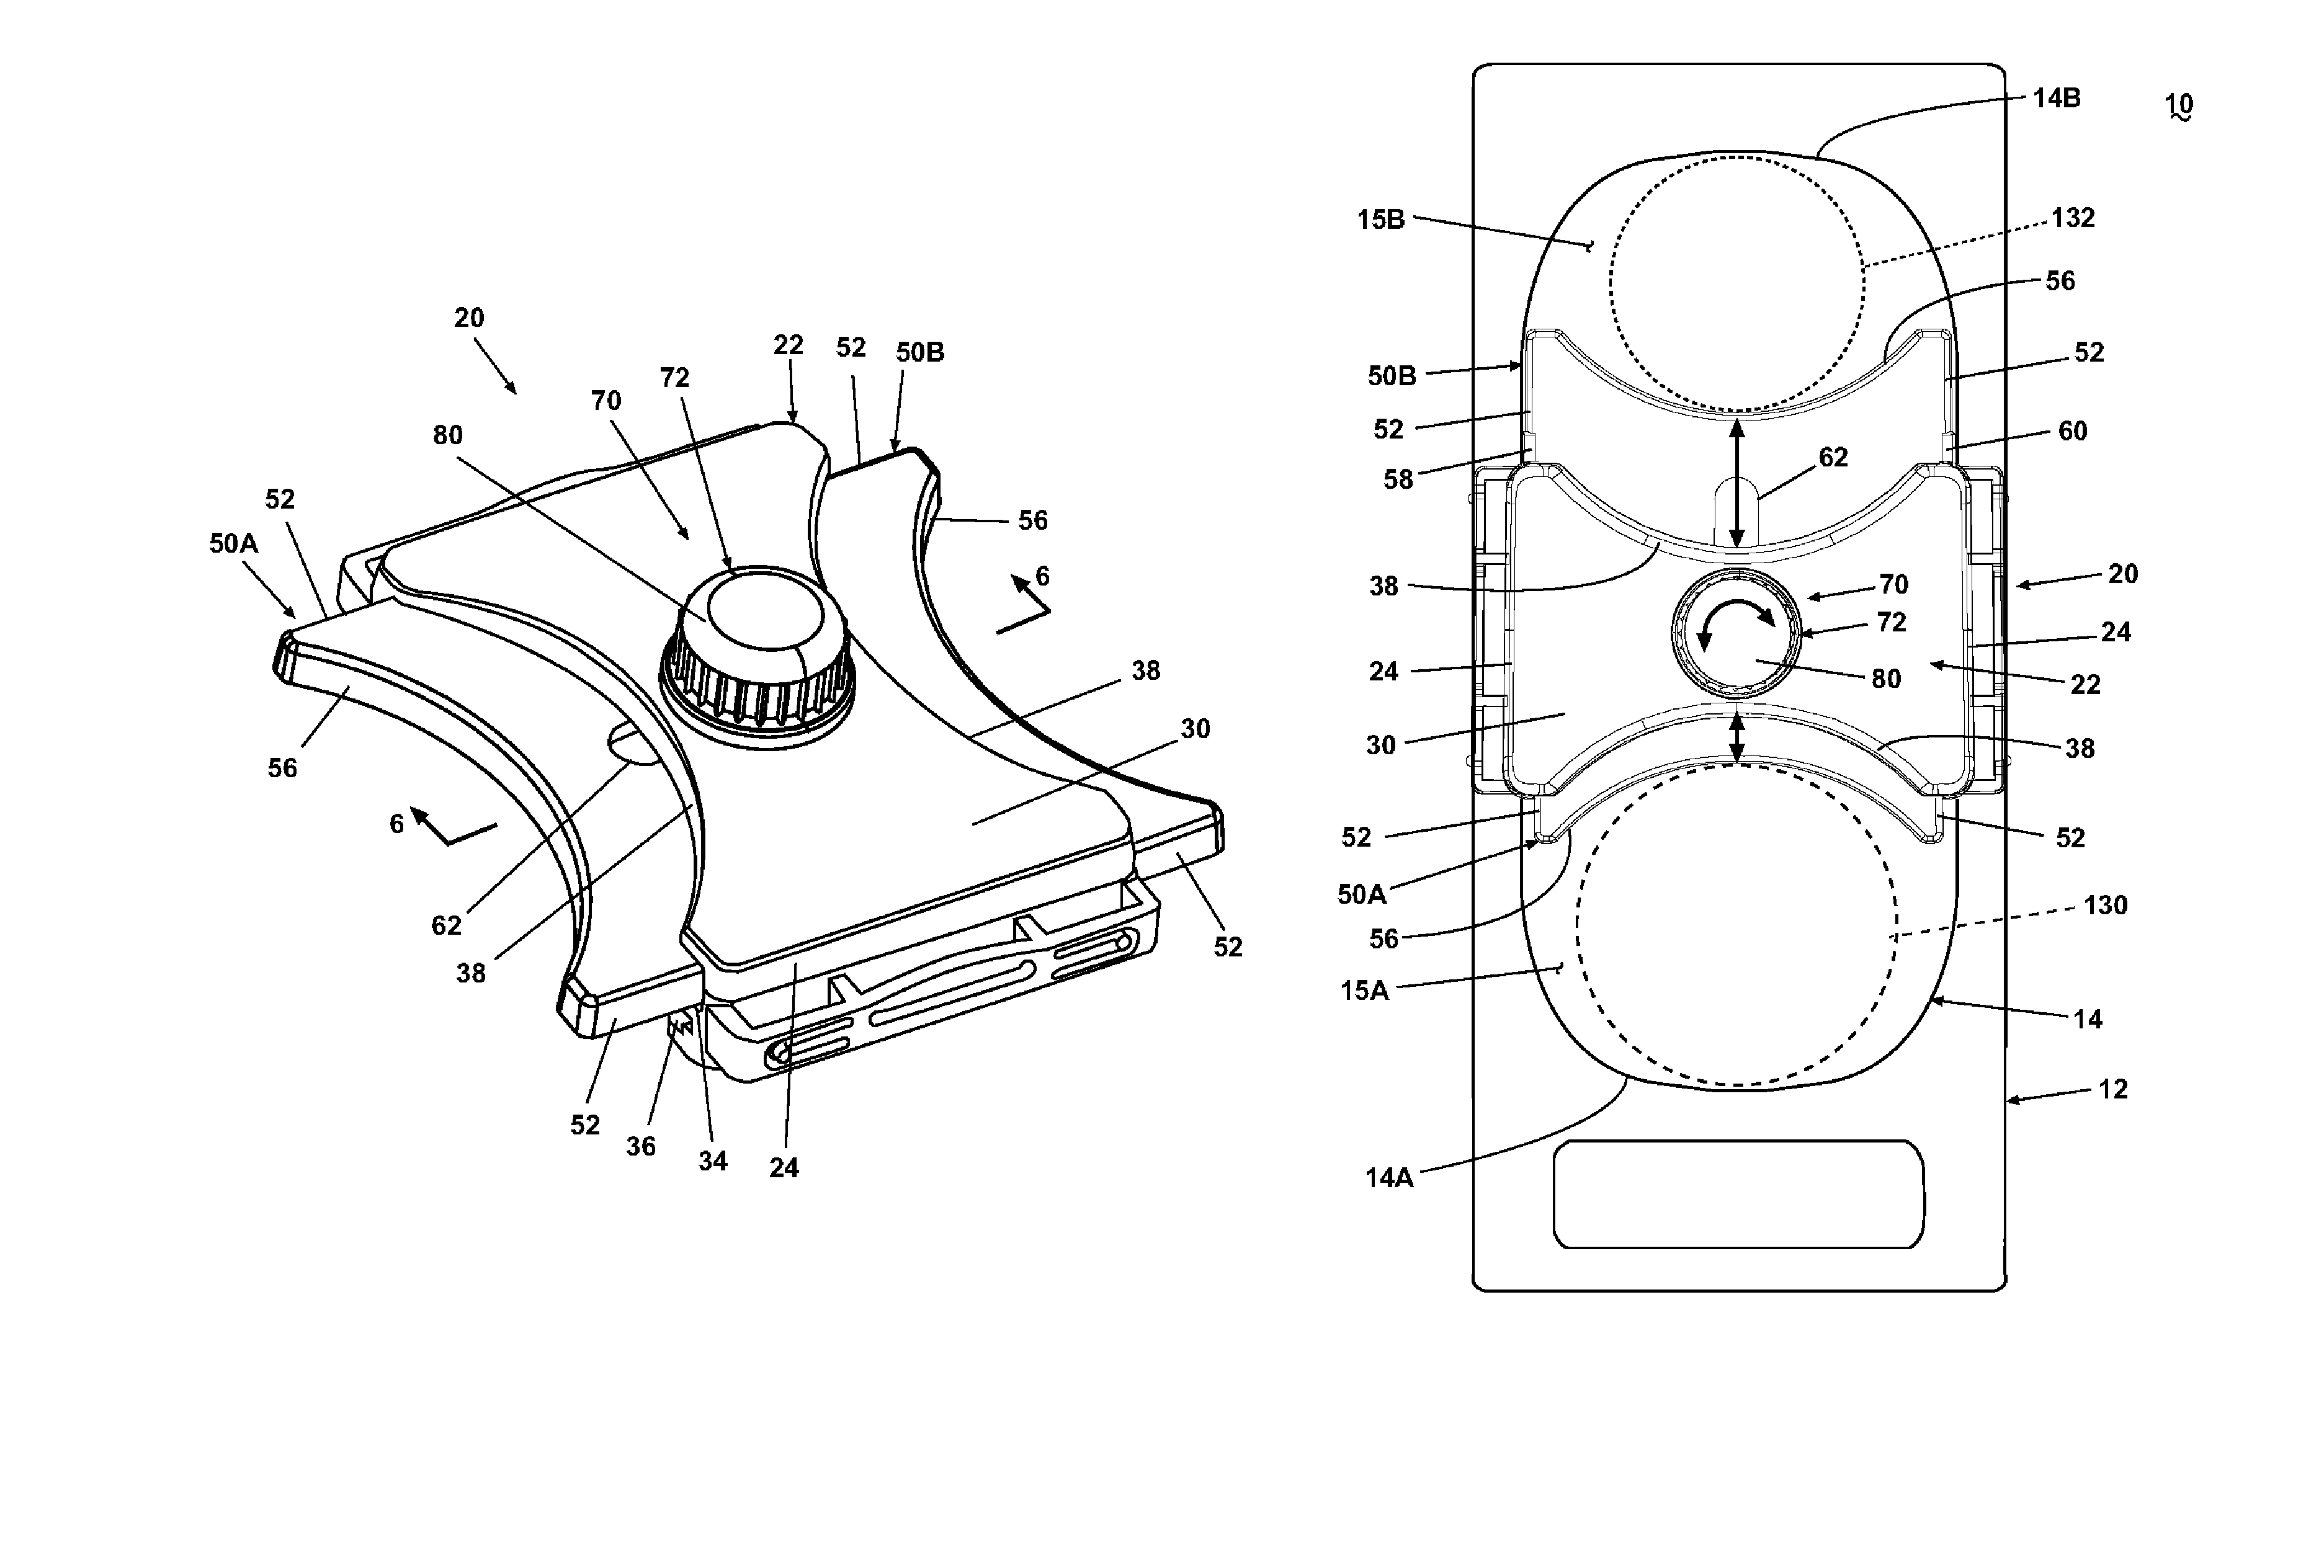 Multi-chamber vehicular beverage container holder with common actuator